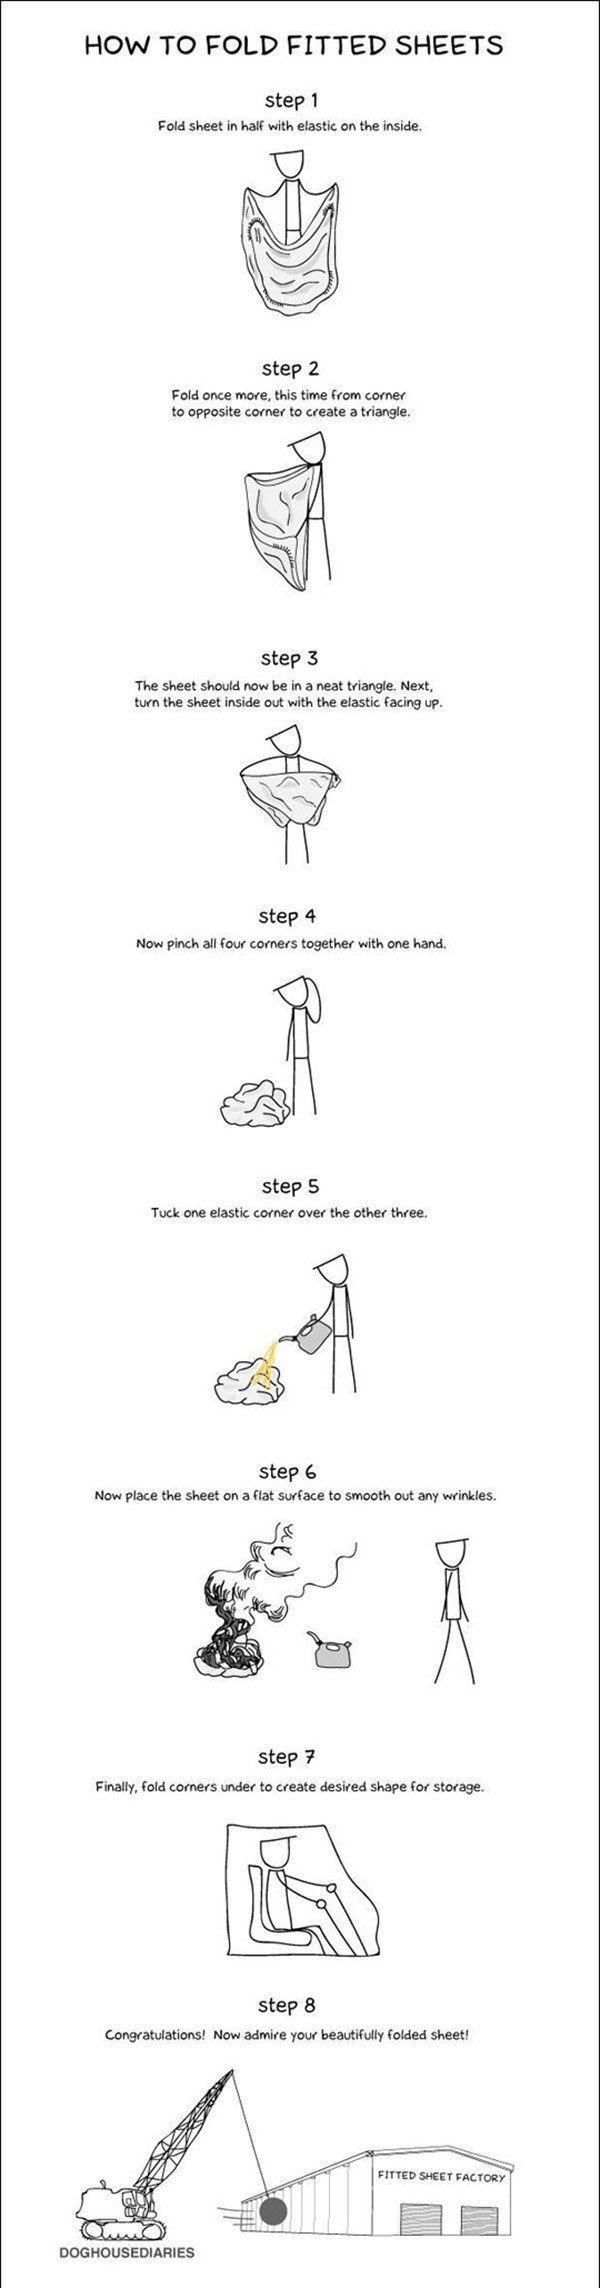 Fitted Sheets funny picture